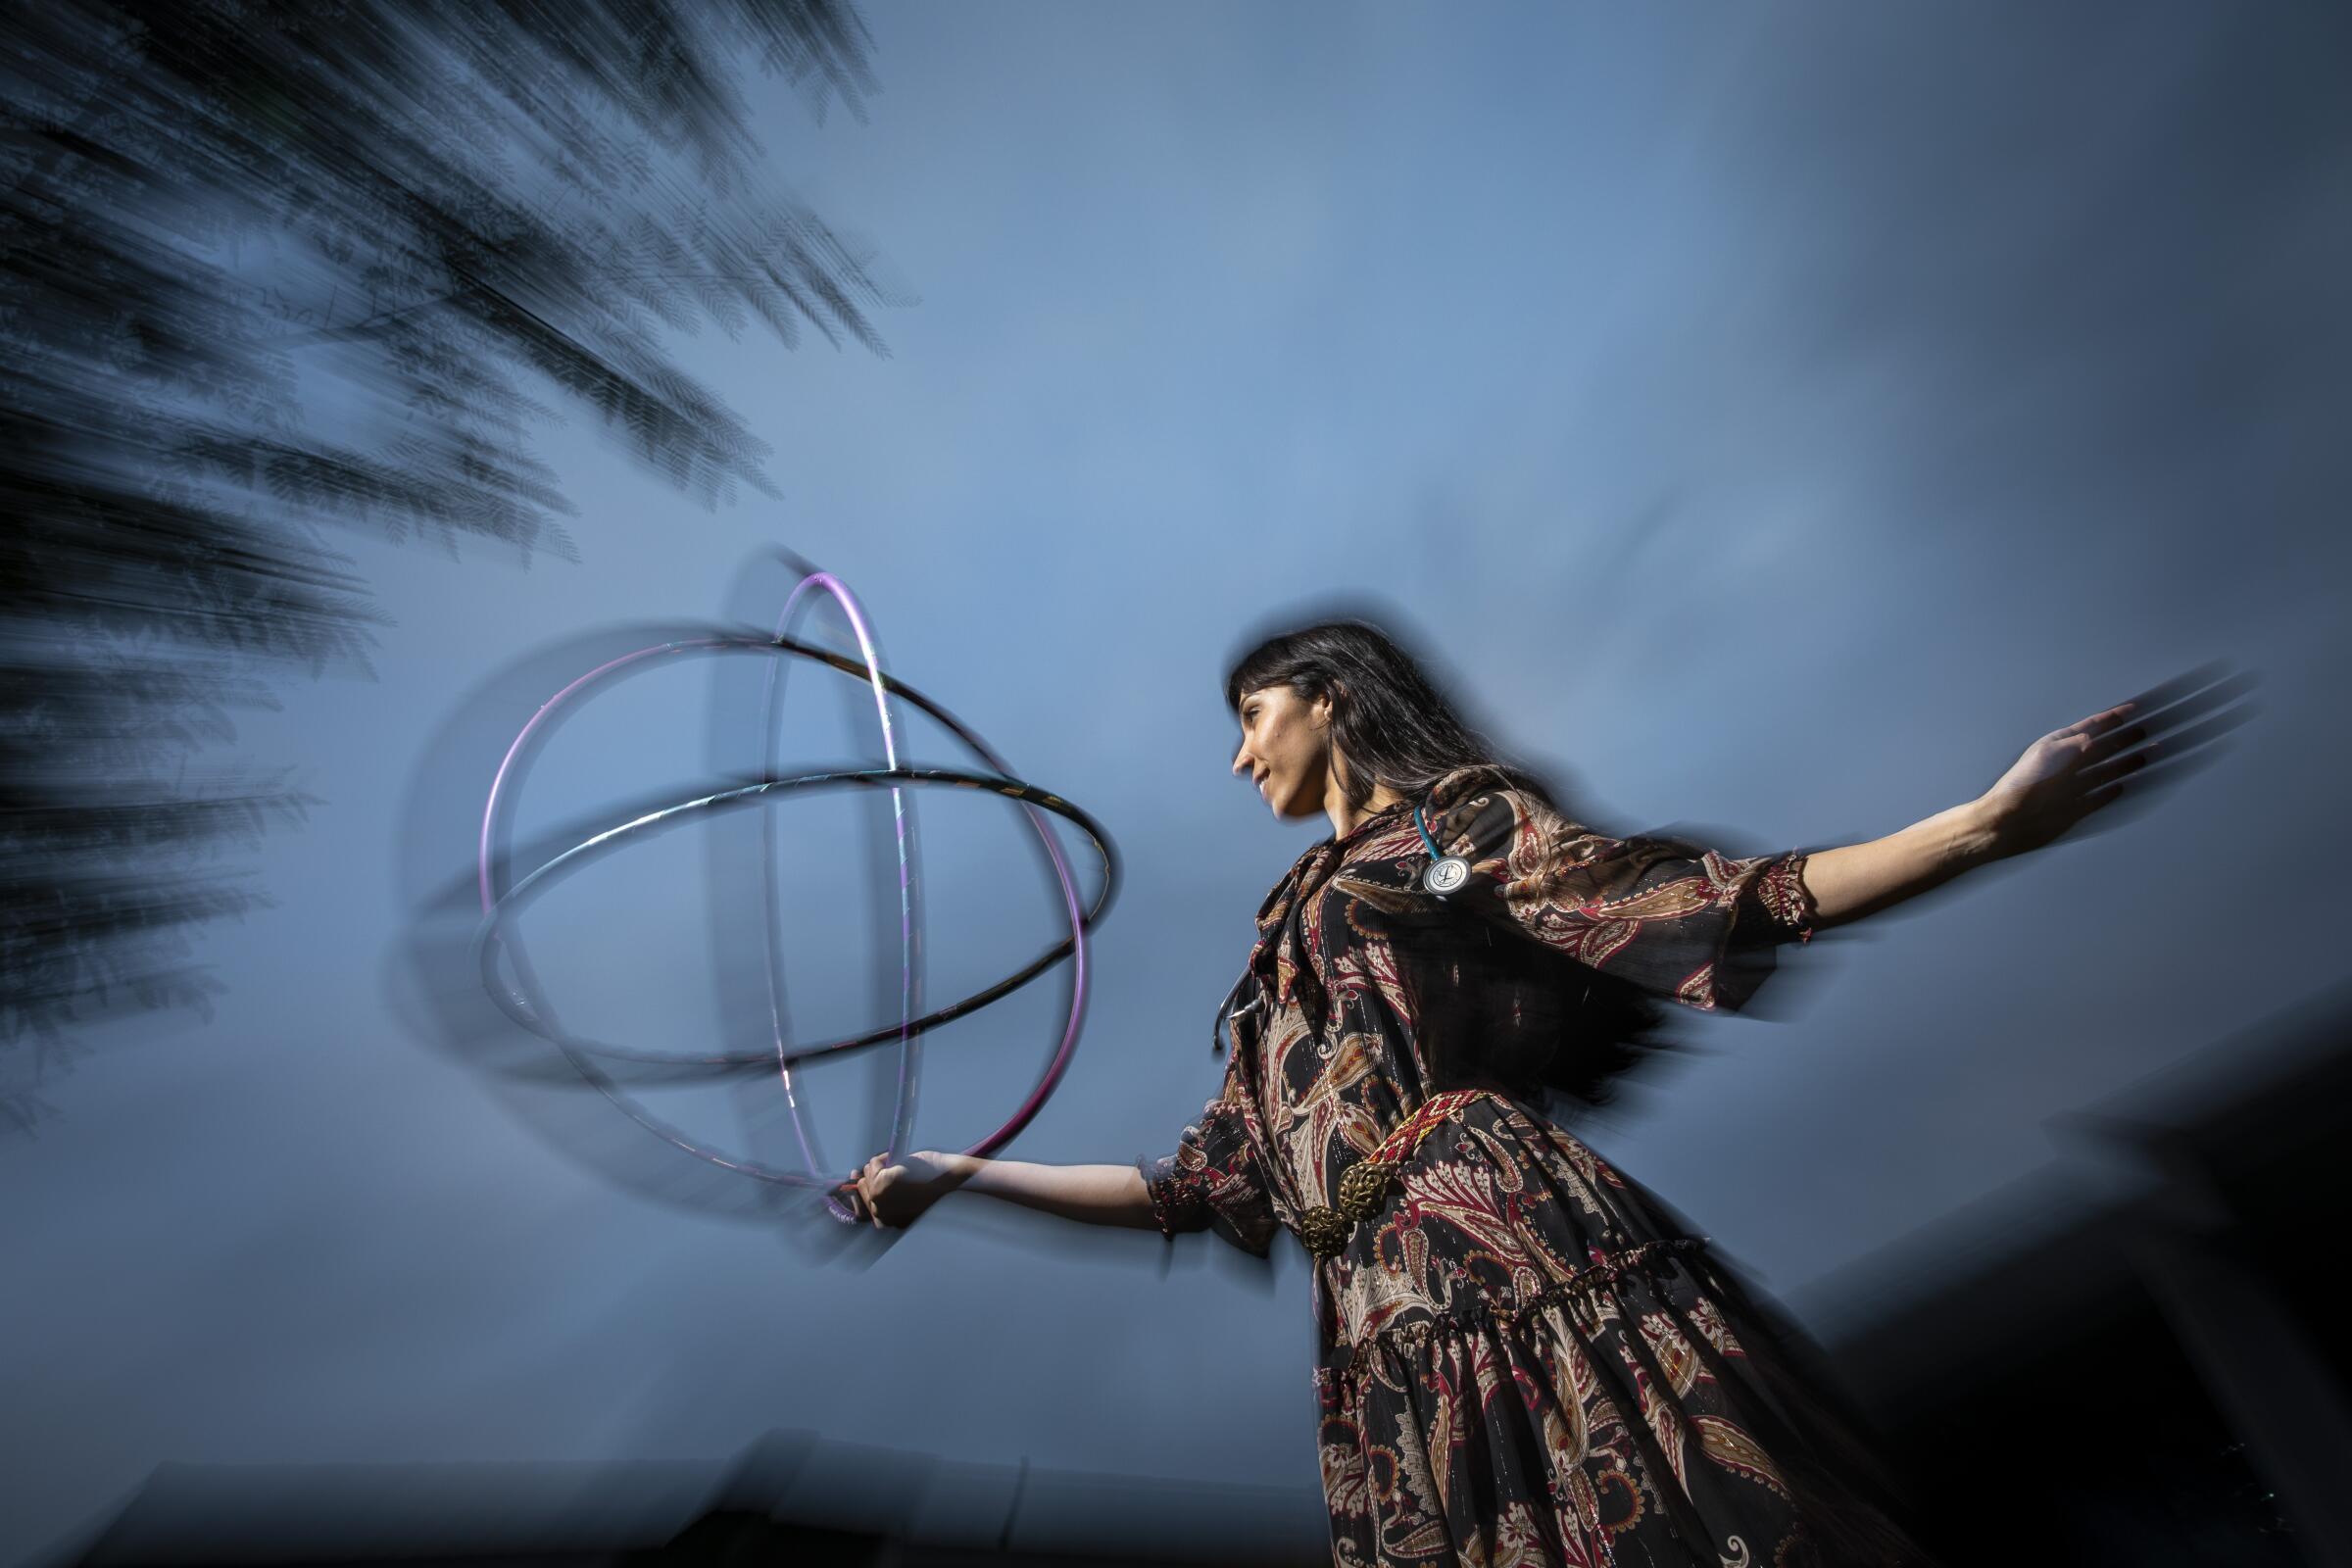 Dr. G. Sofia Nelson is pictured dancing with a hoop.